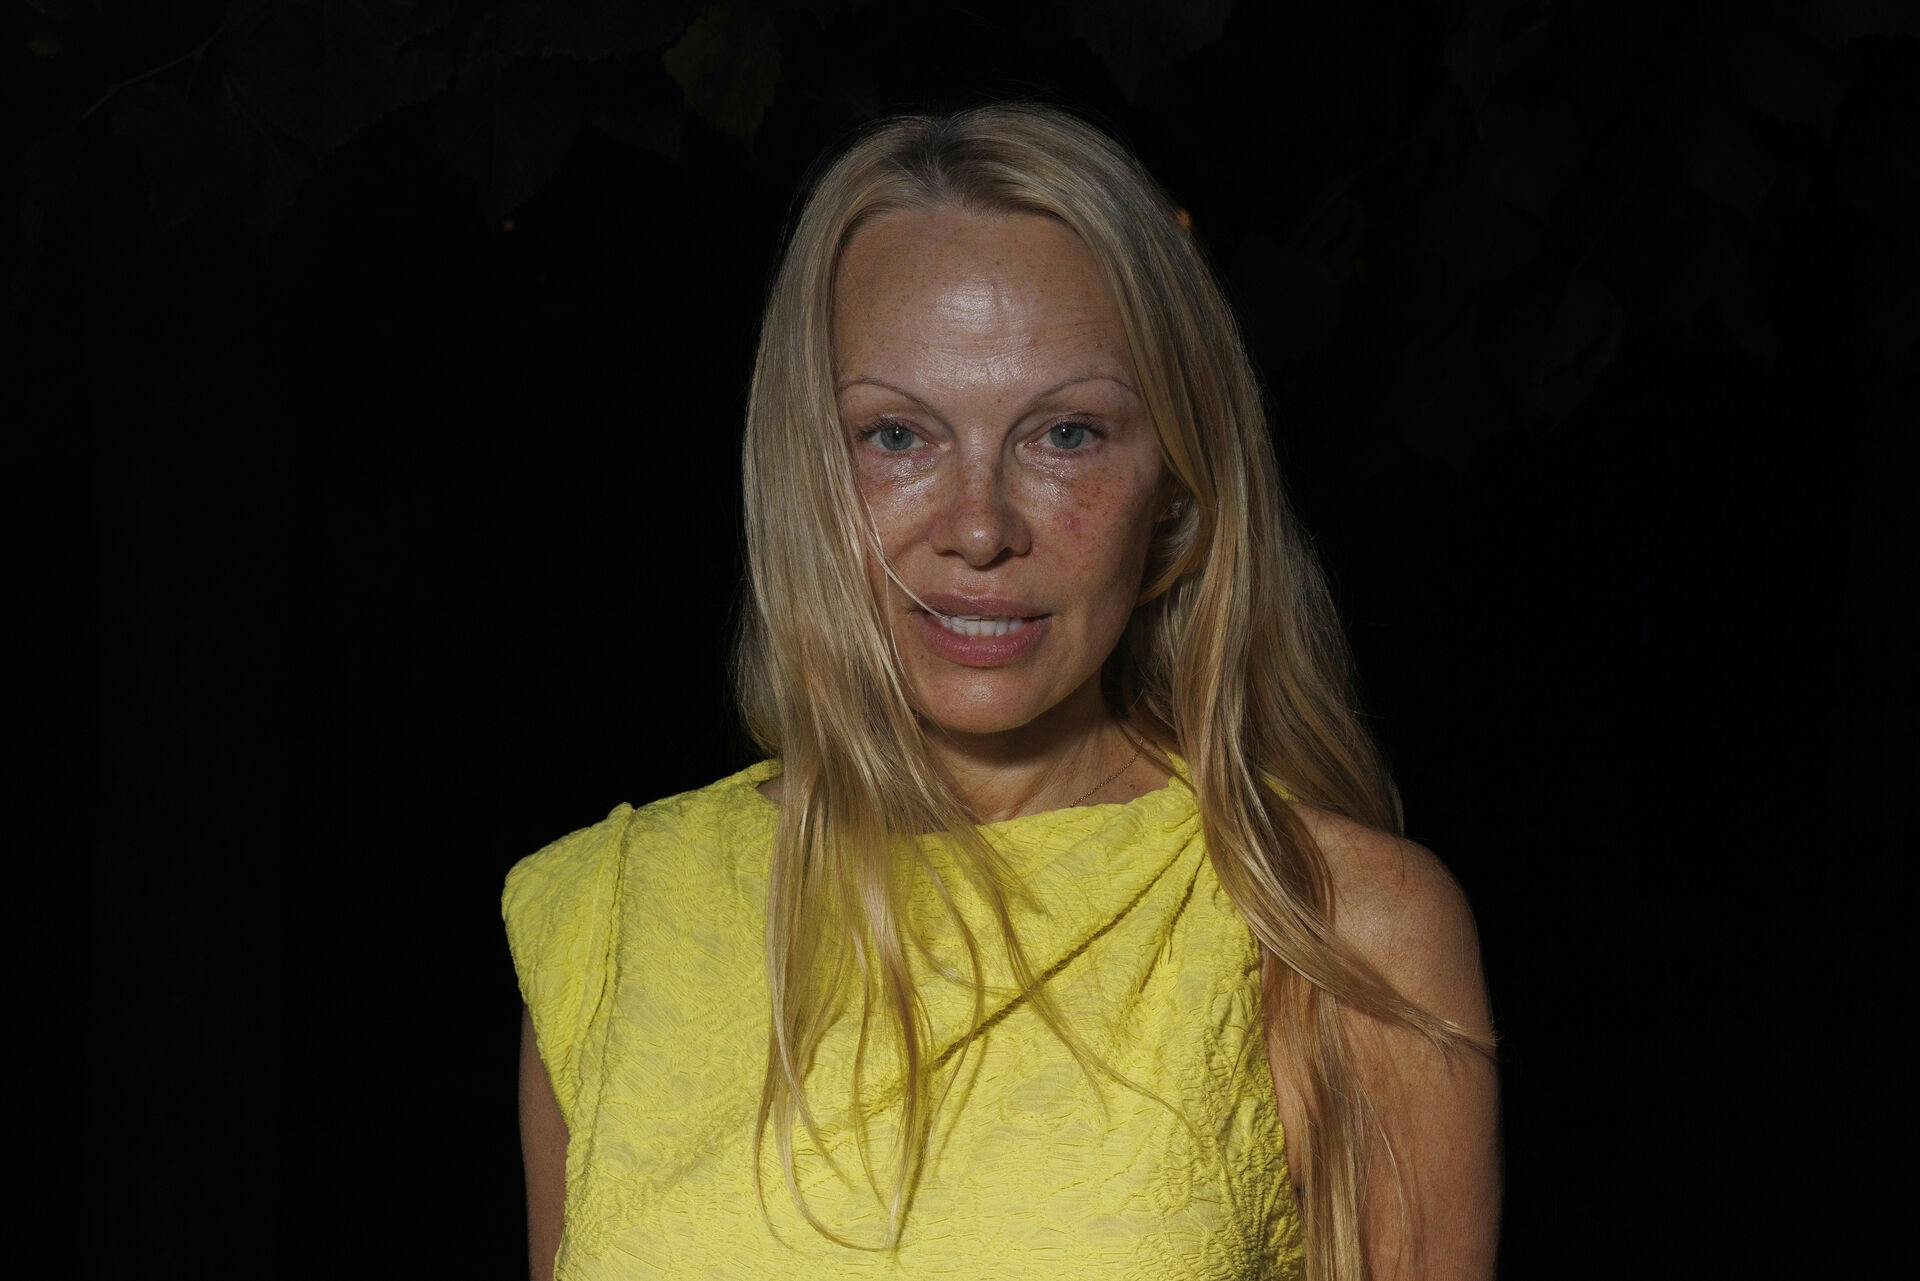 Pamela Anderson attends the Isabel Marant Spring/Summer 2024 womenswear fashion collection presented Thursday, Sept. 28, 2023 in Paris. (AP Photo/Vianney Le Caer)